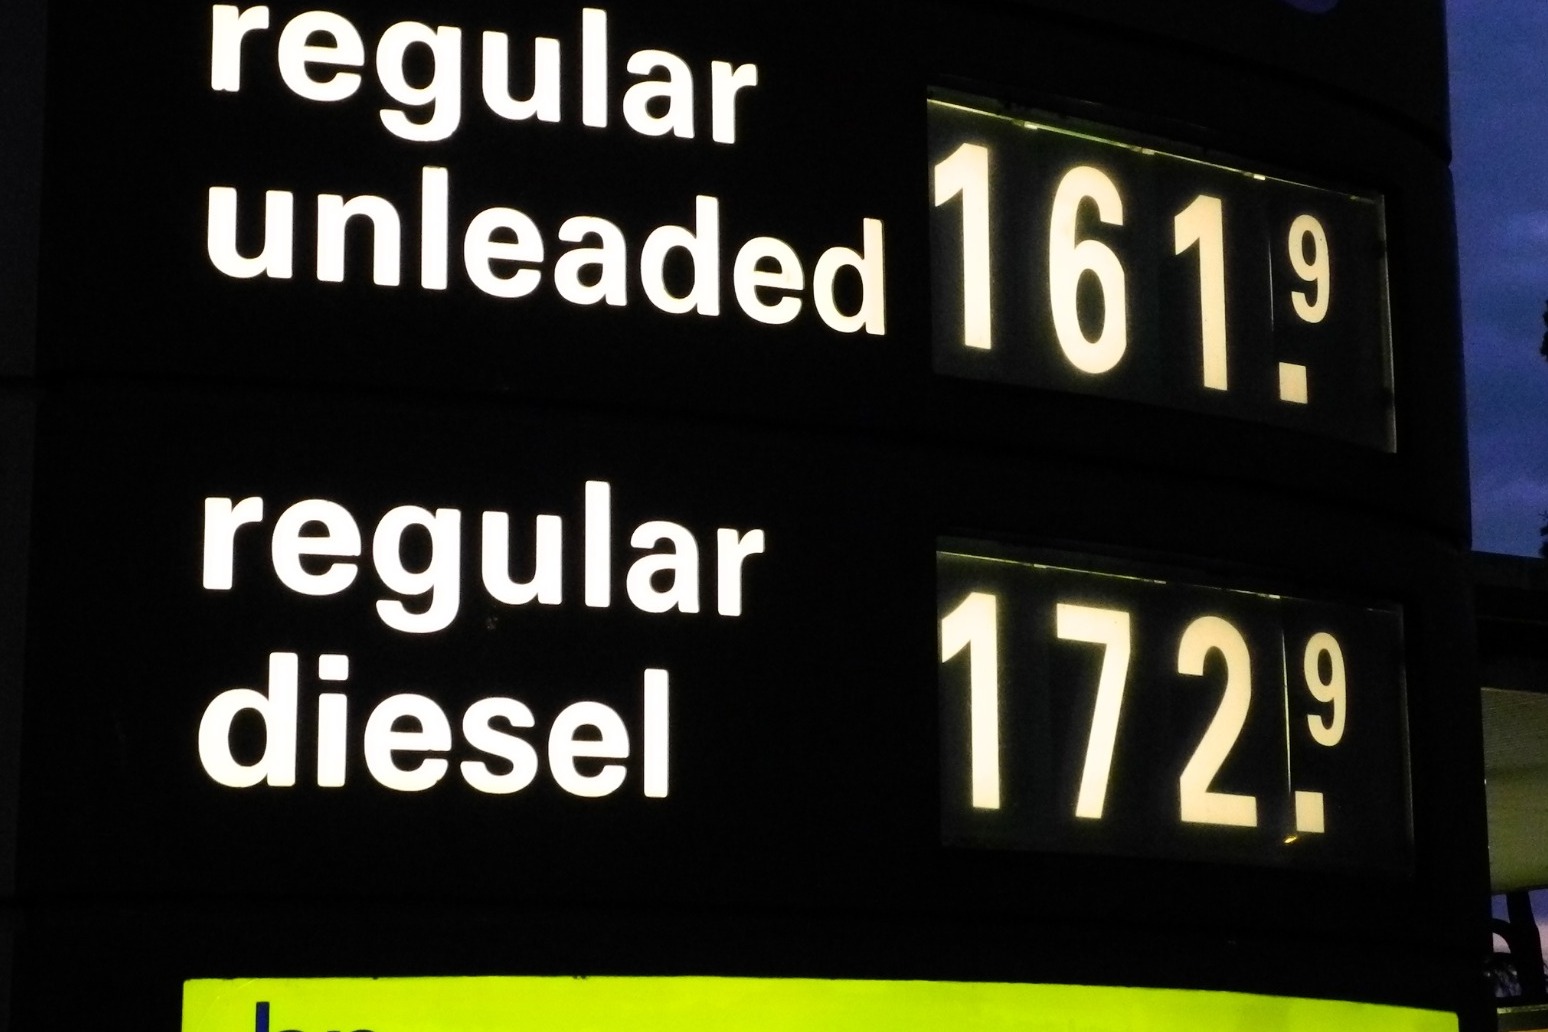 Families hit by rise in annual petrol costs of nearly £400 – Labour 